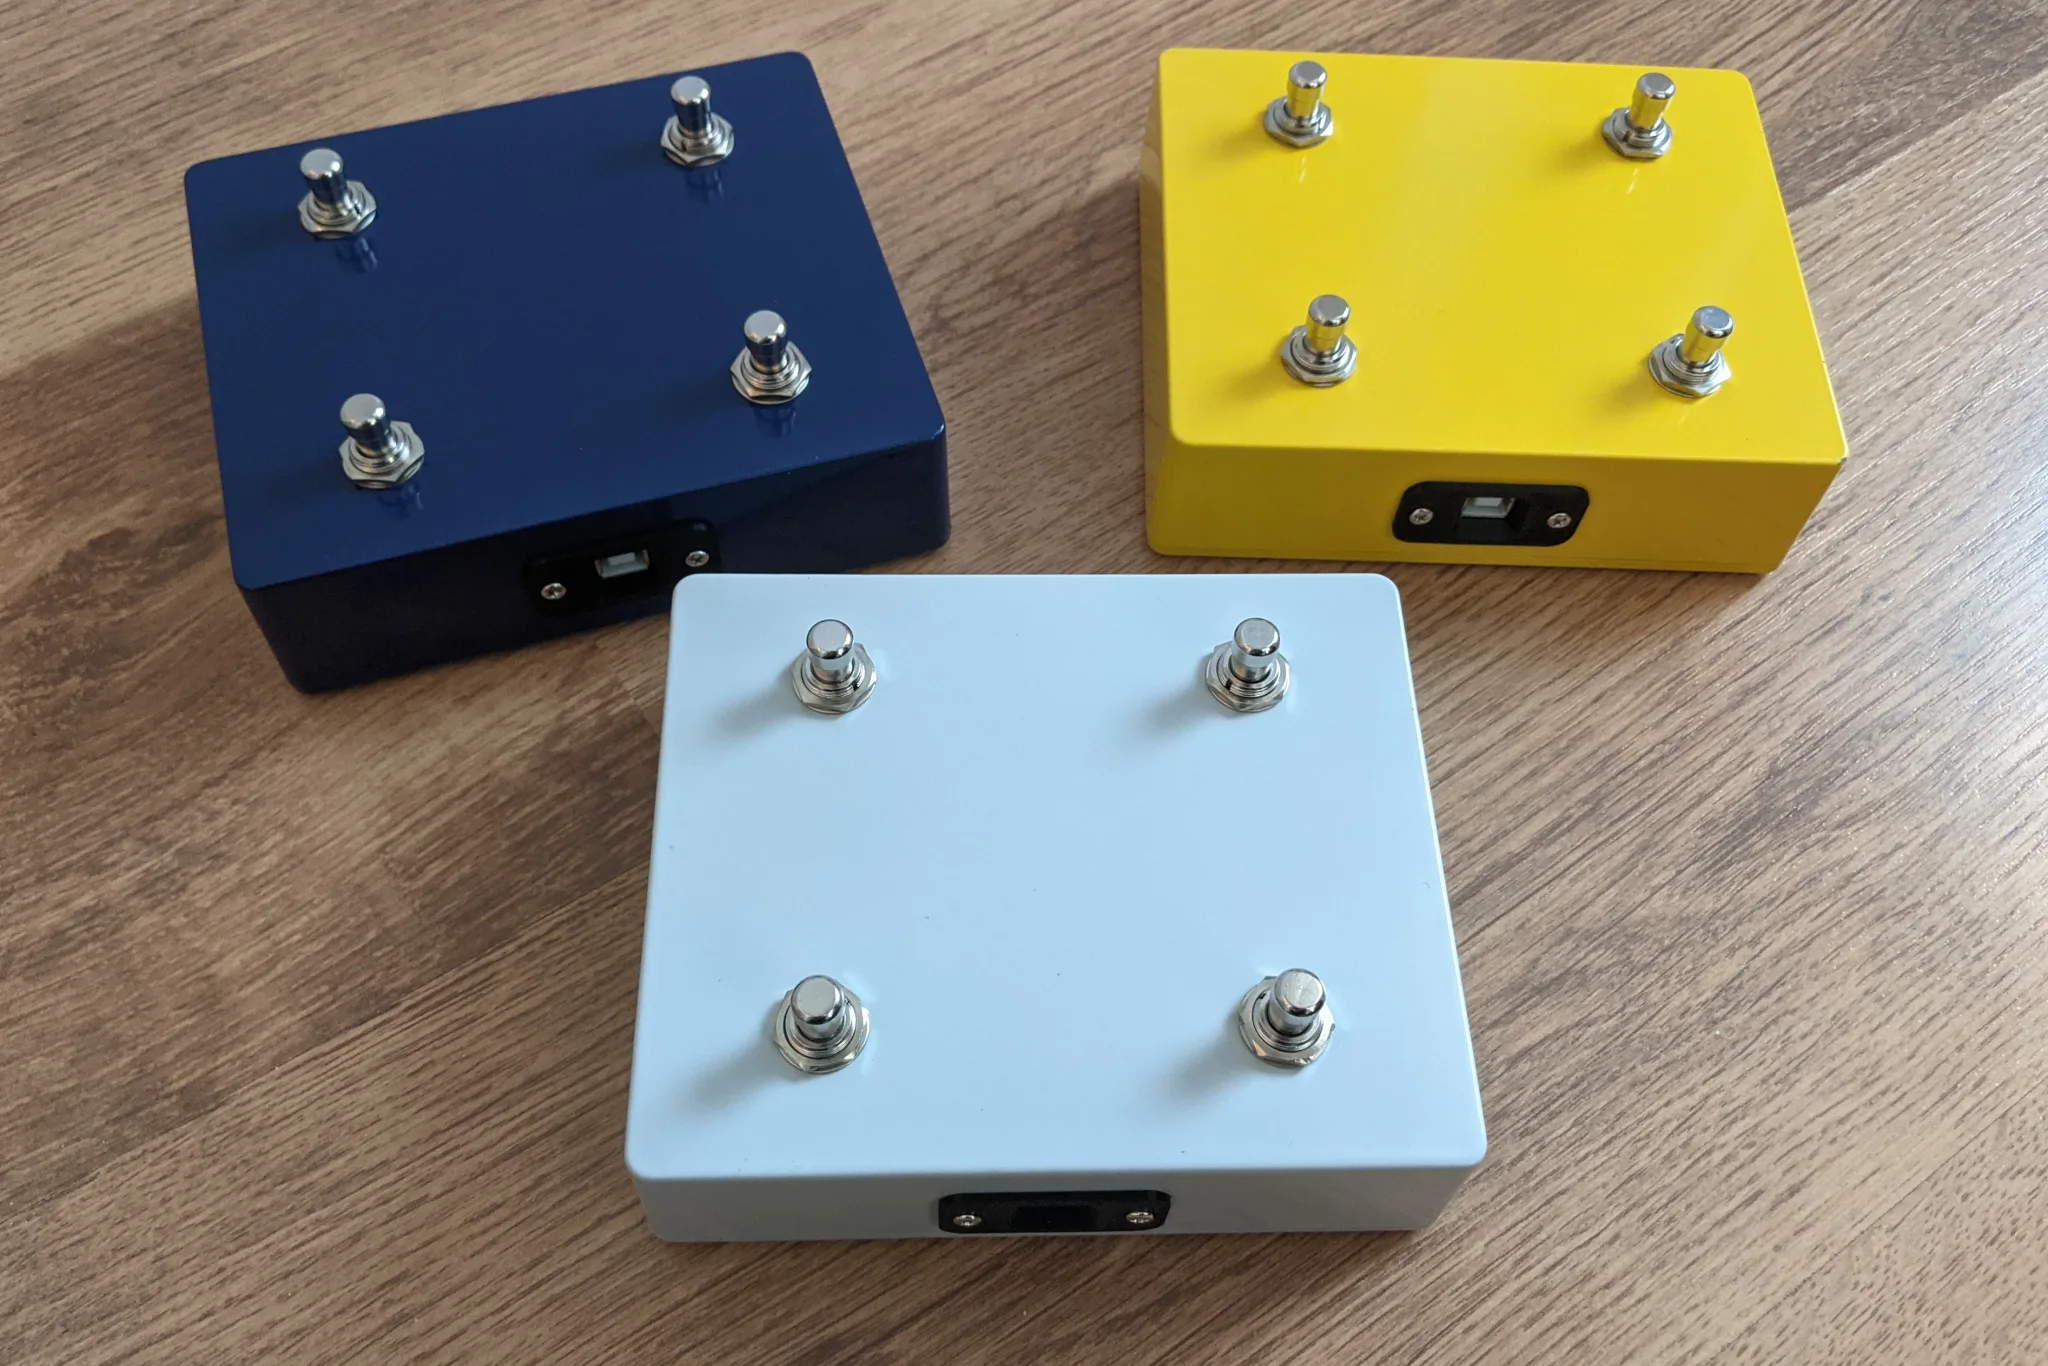 Three painted metal enclosures with four footswitches each,
and a USB connector on one side.